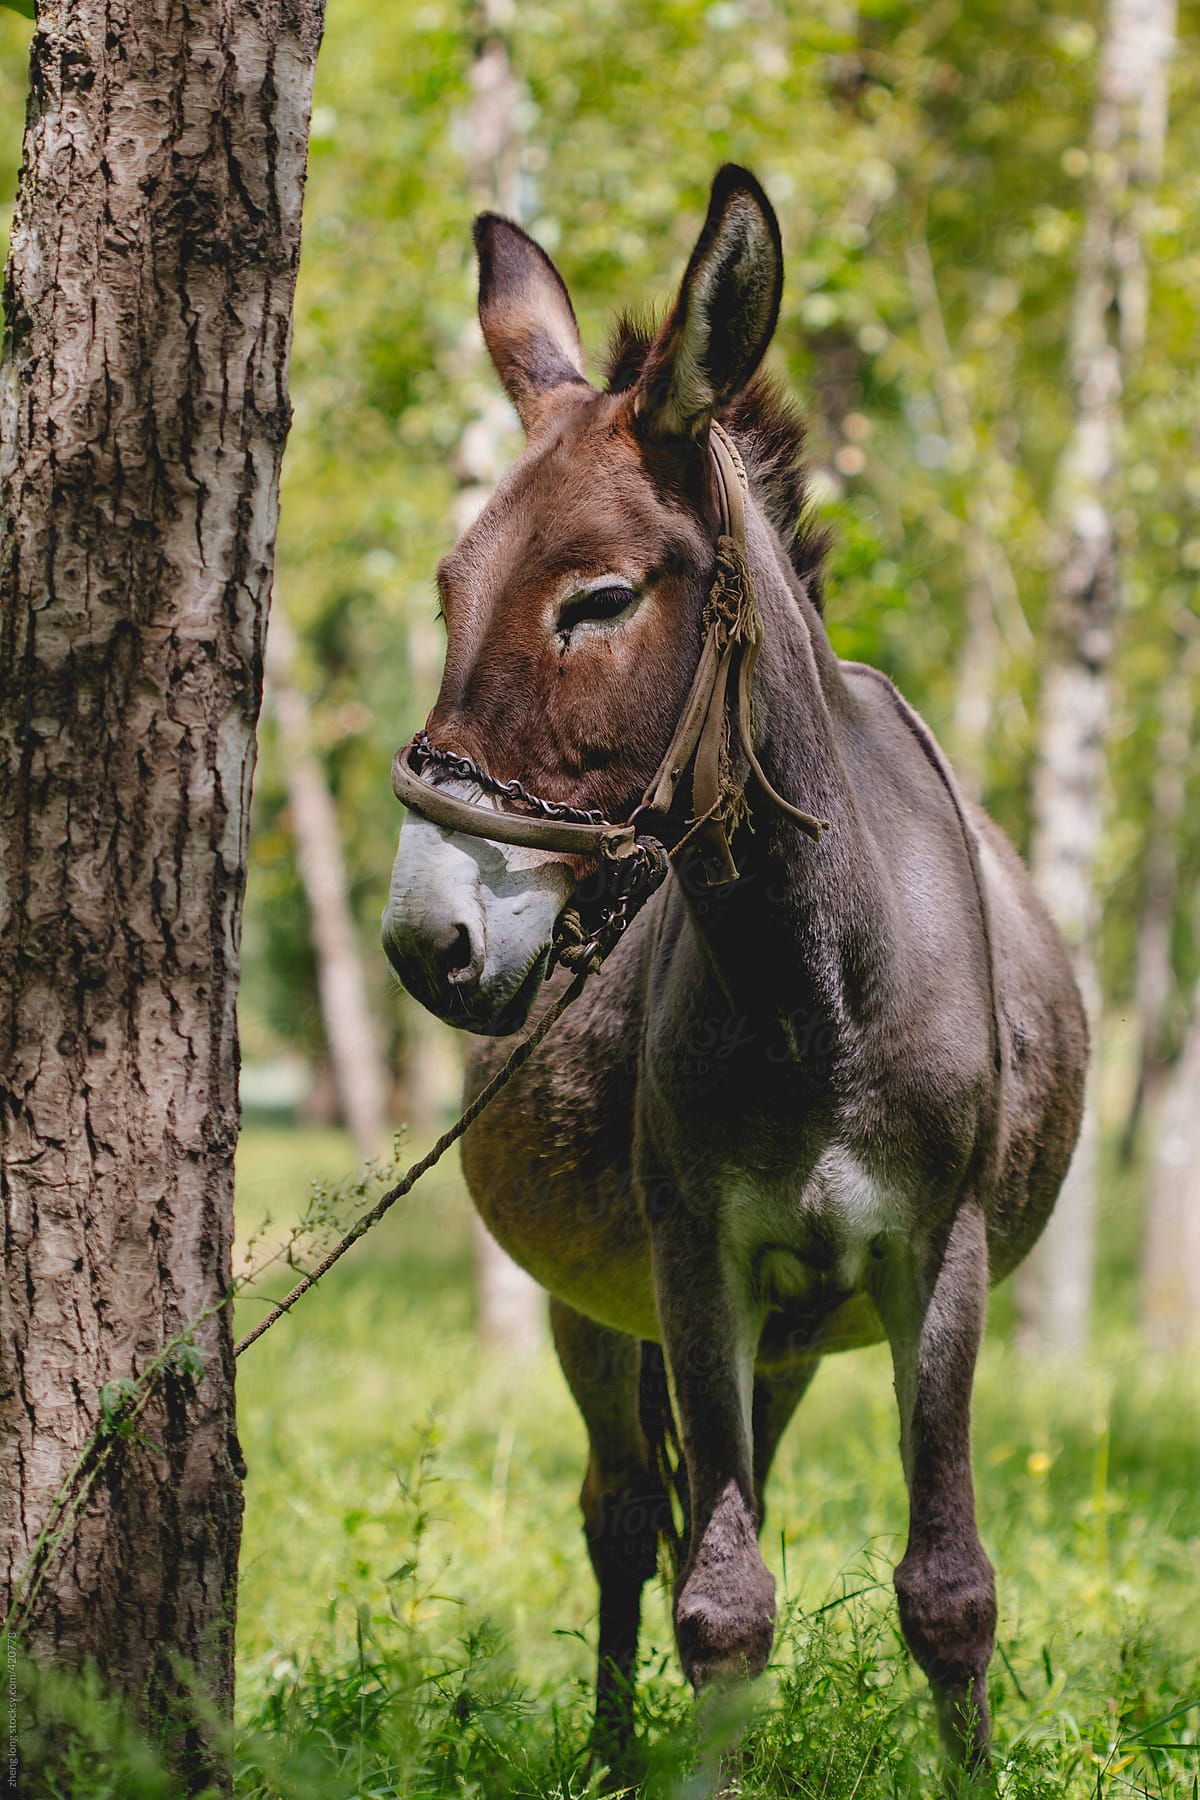 A donkey in the woods